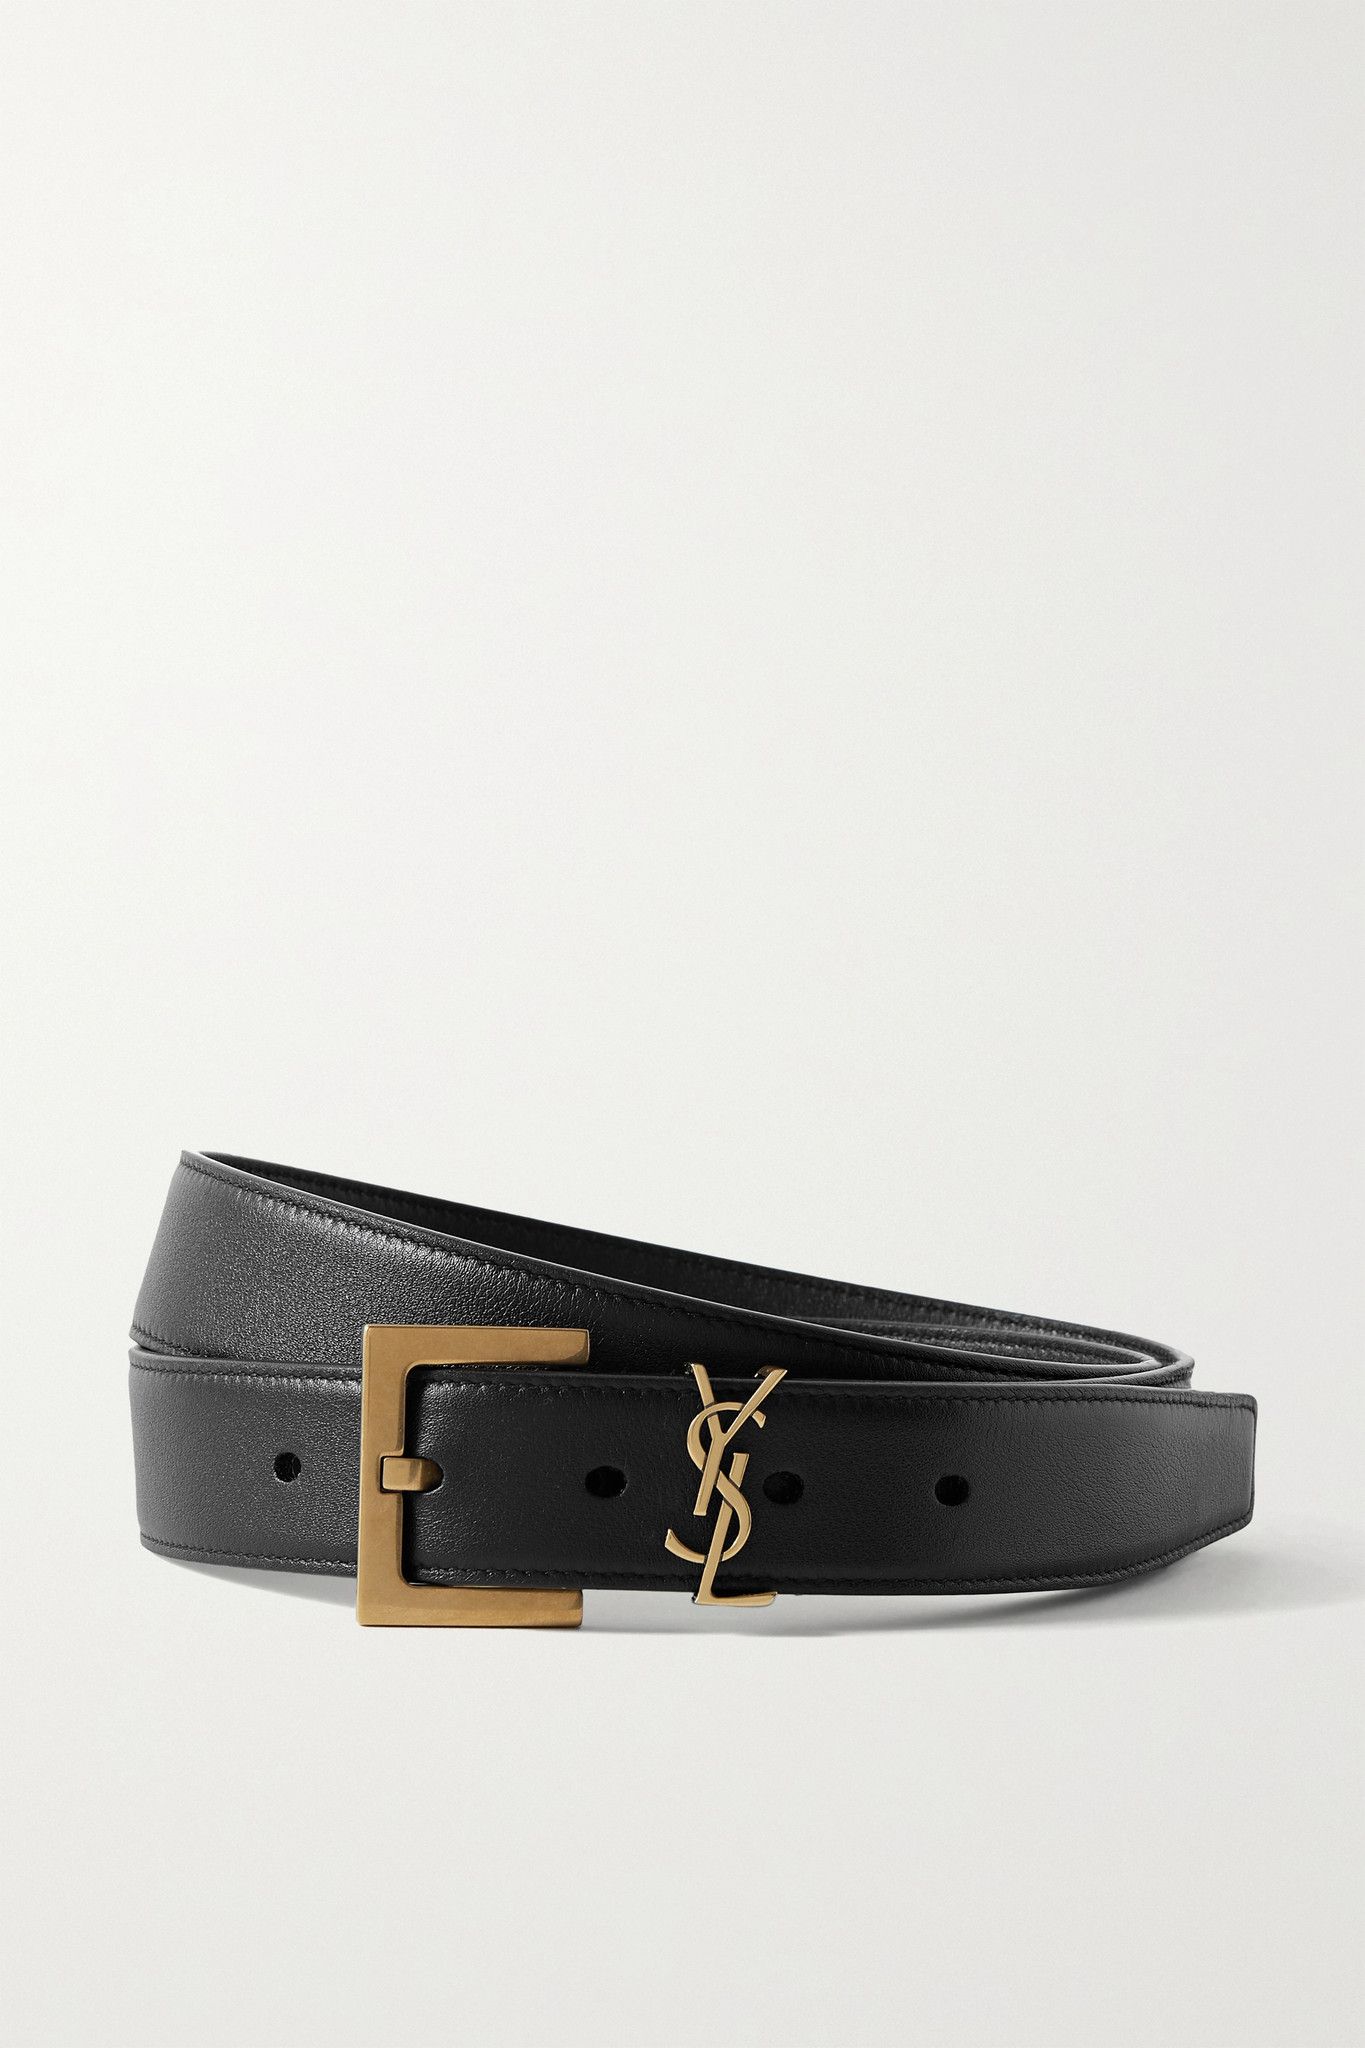 Accessorize in Style: Latest Gold Belt Designs